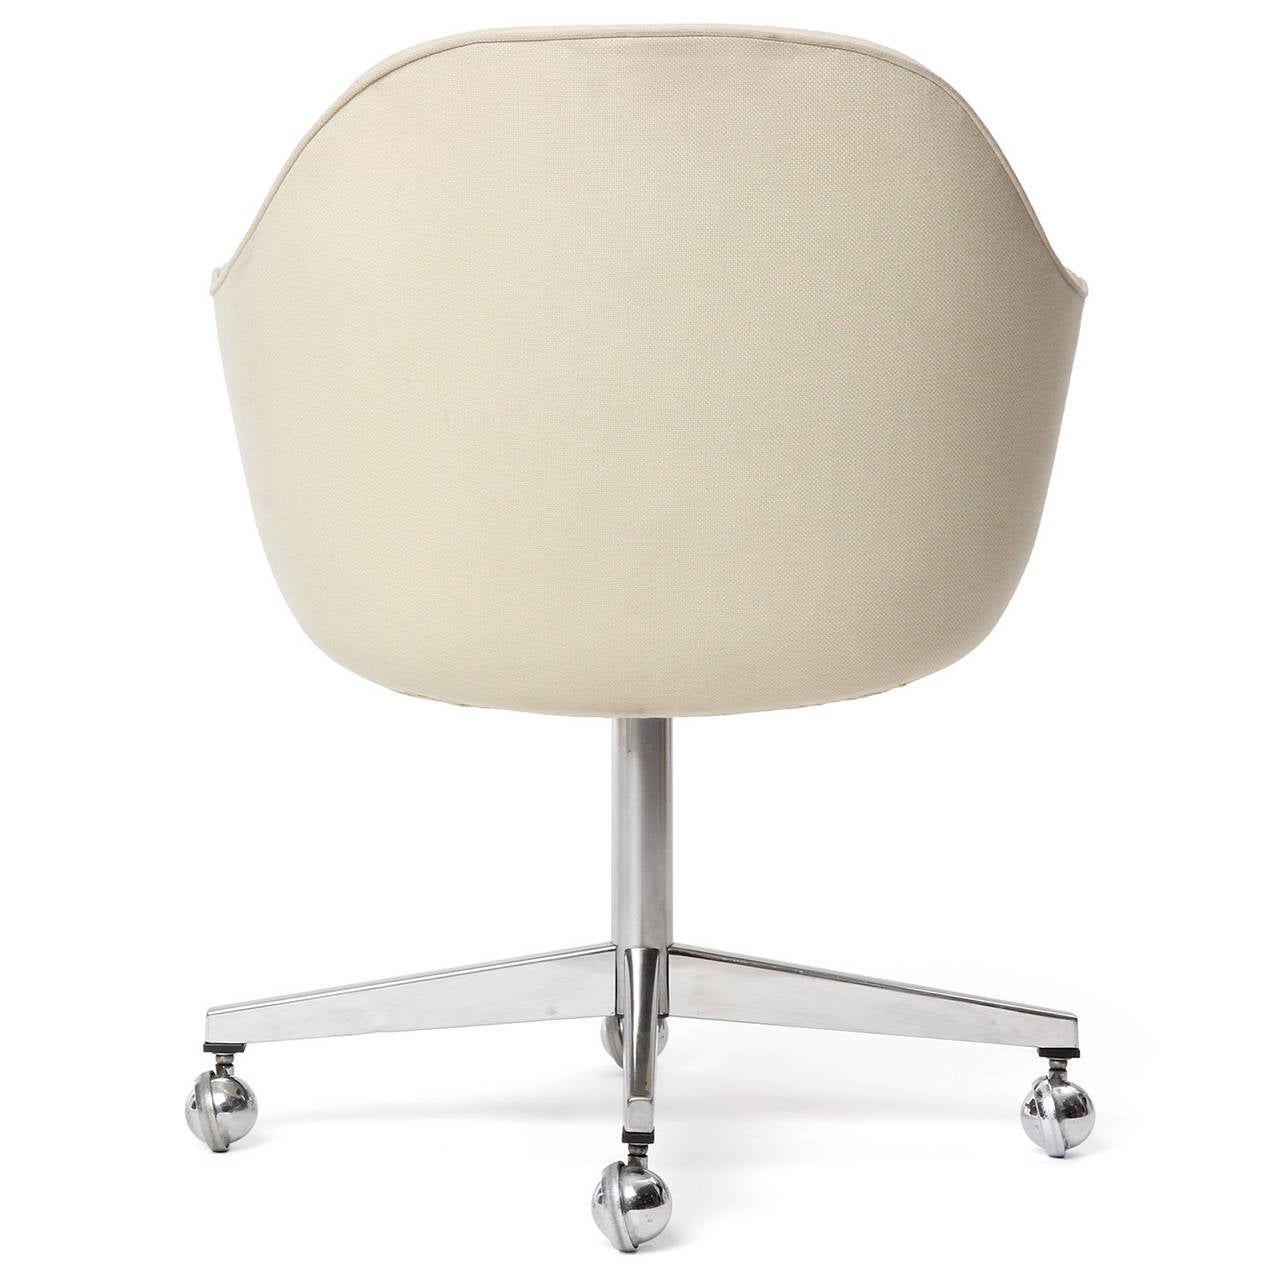 Mid-20th Century Swiveling Armchair by Eero Saarinen for Knoll For Sale